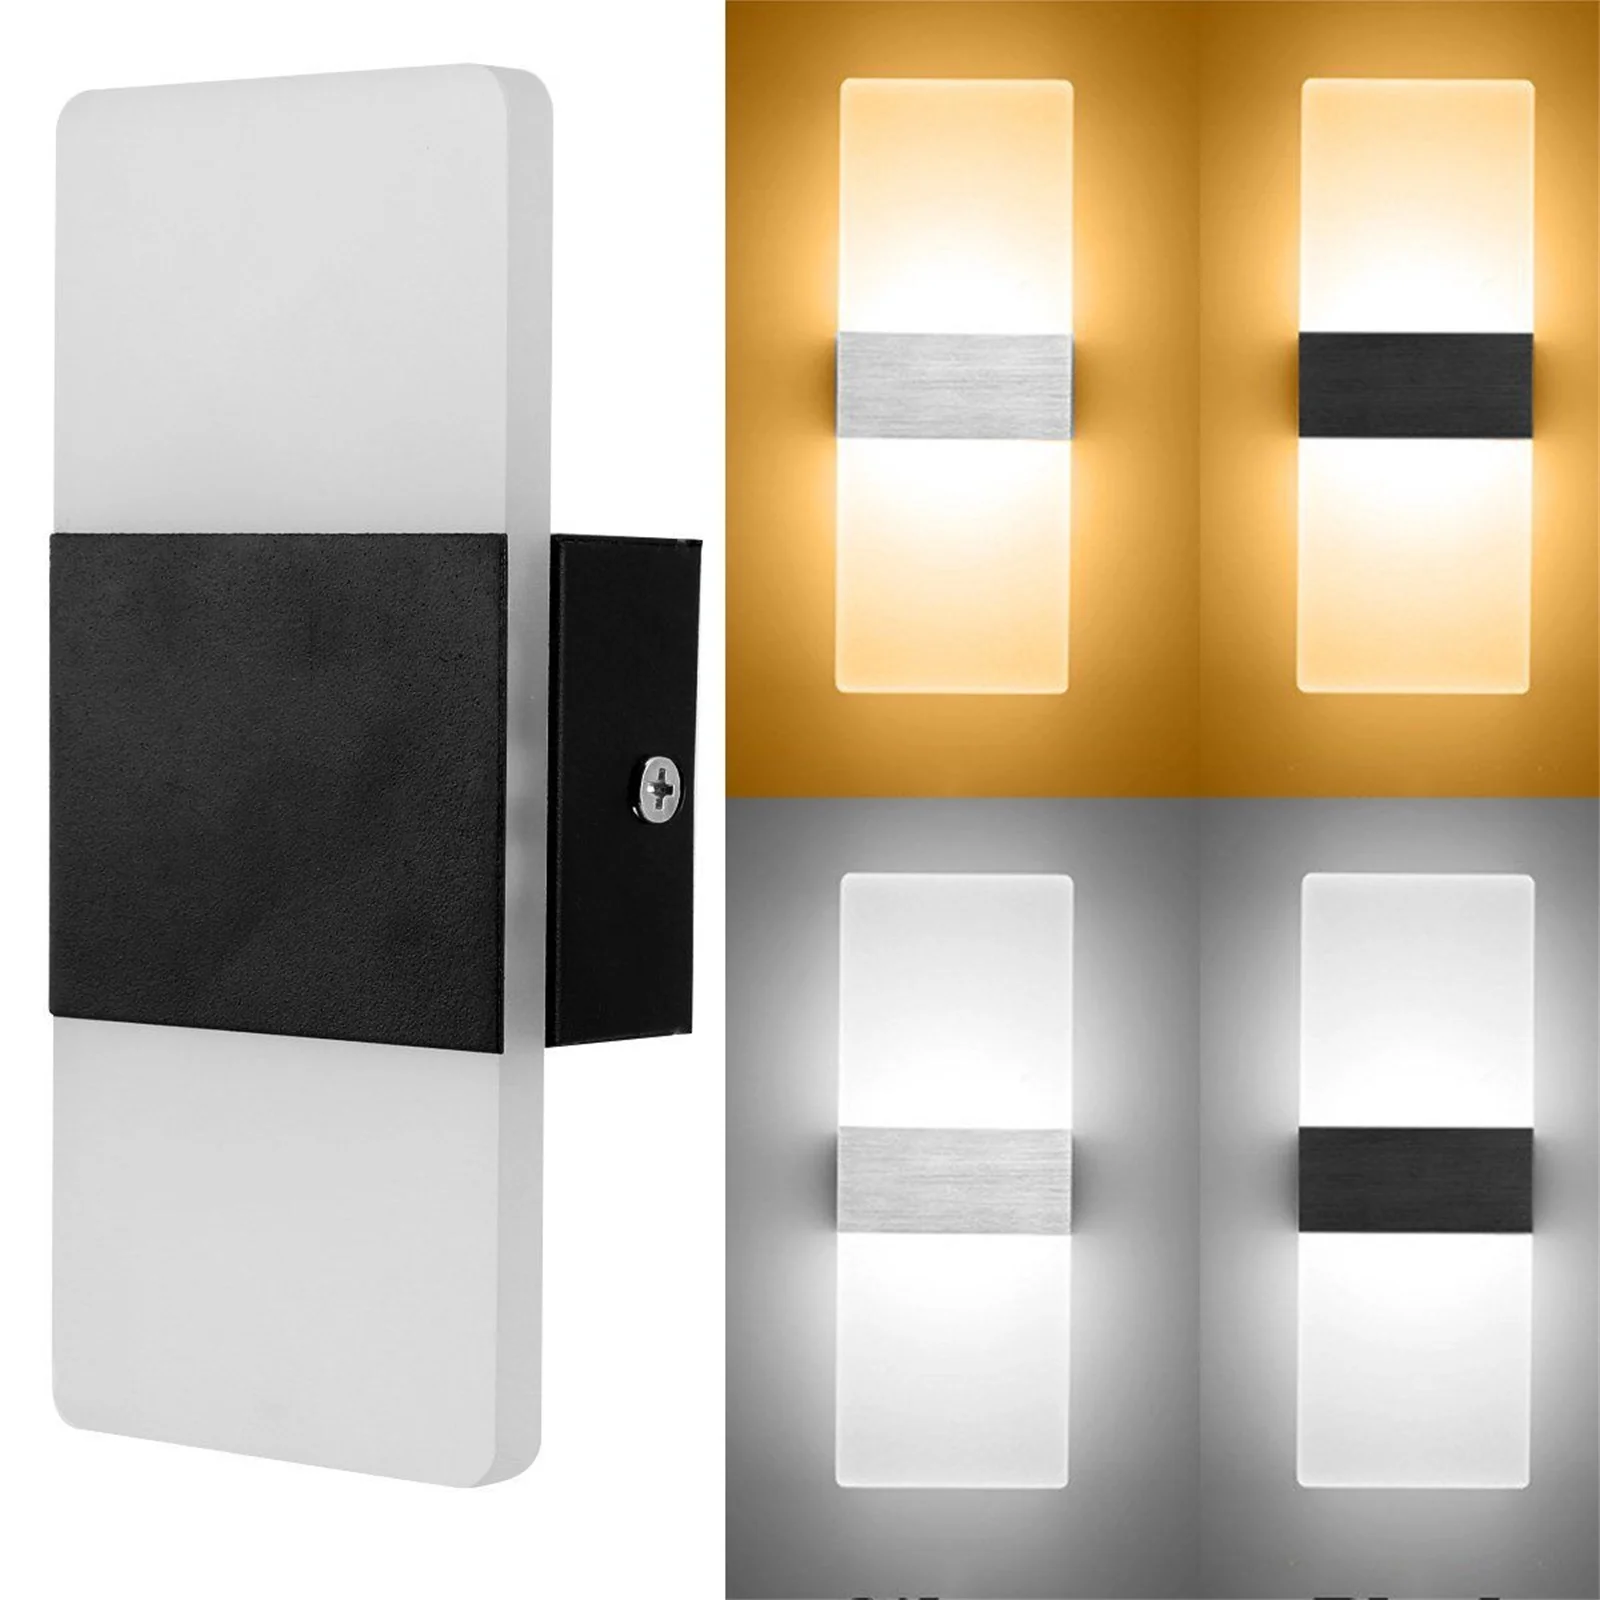 Modern LED Wall Lighting Up Down Cube Bedroom Sconce Lamp Fixture Indoor Outdoor 